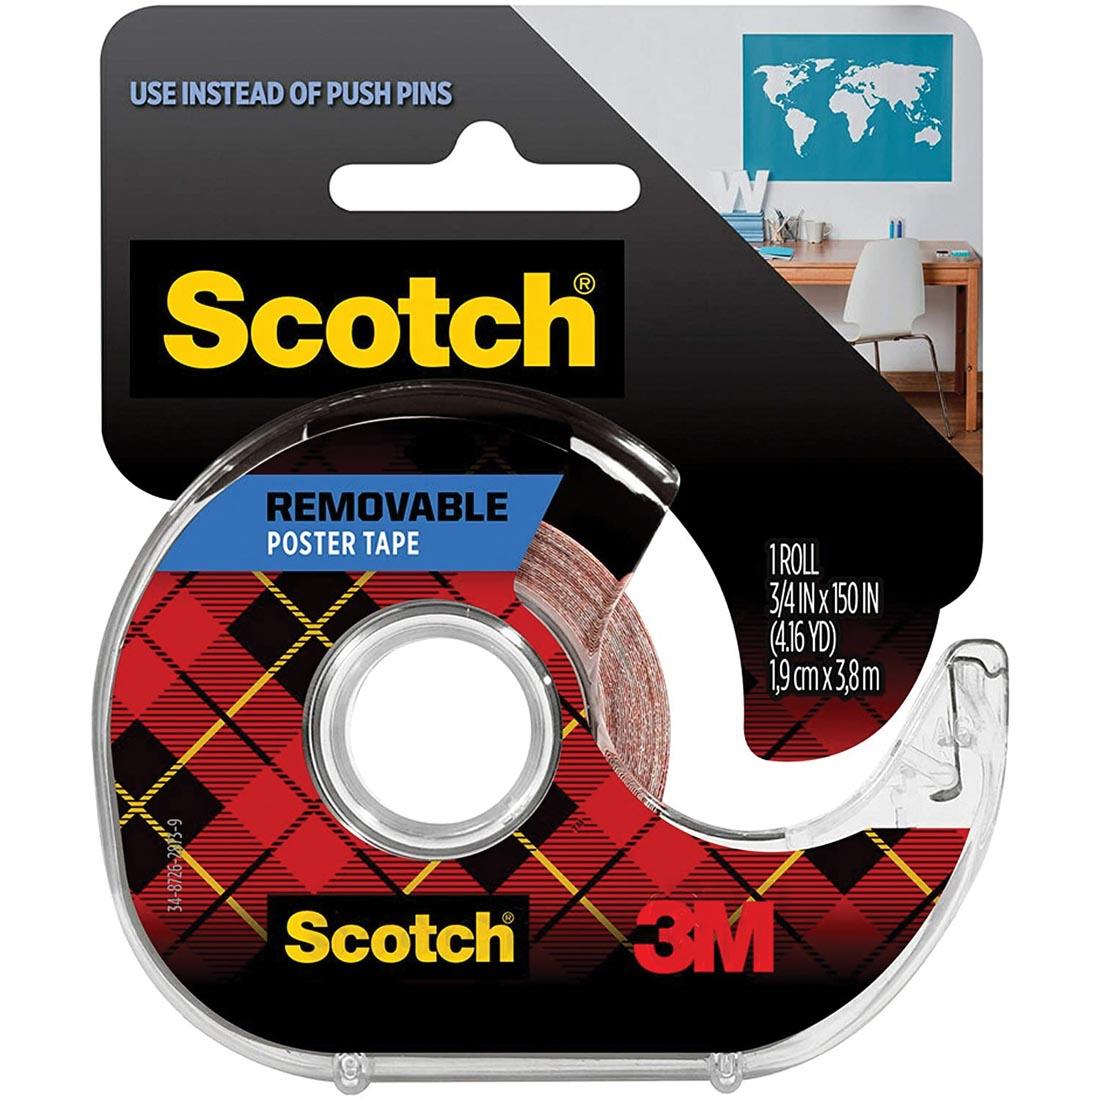 Scotch Removable Poster Tape, 3/4 x 150" roll